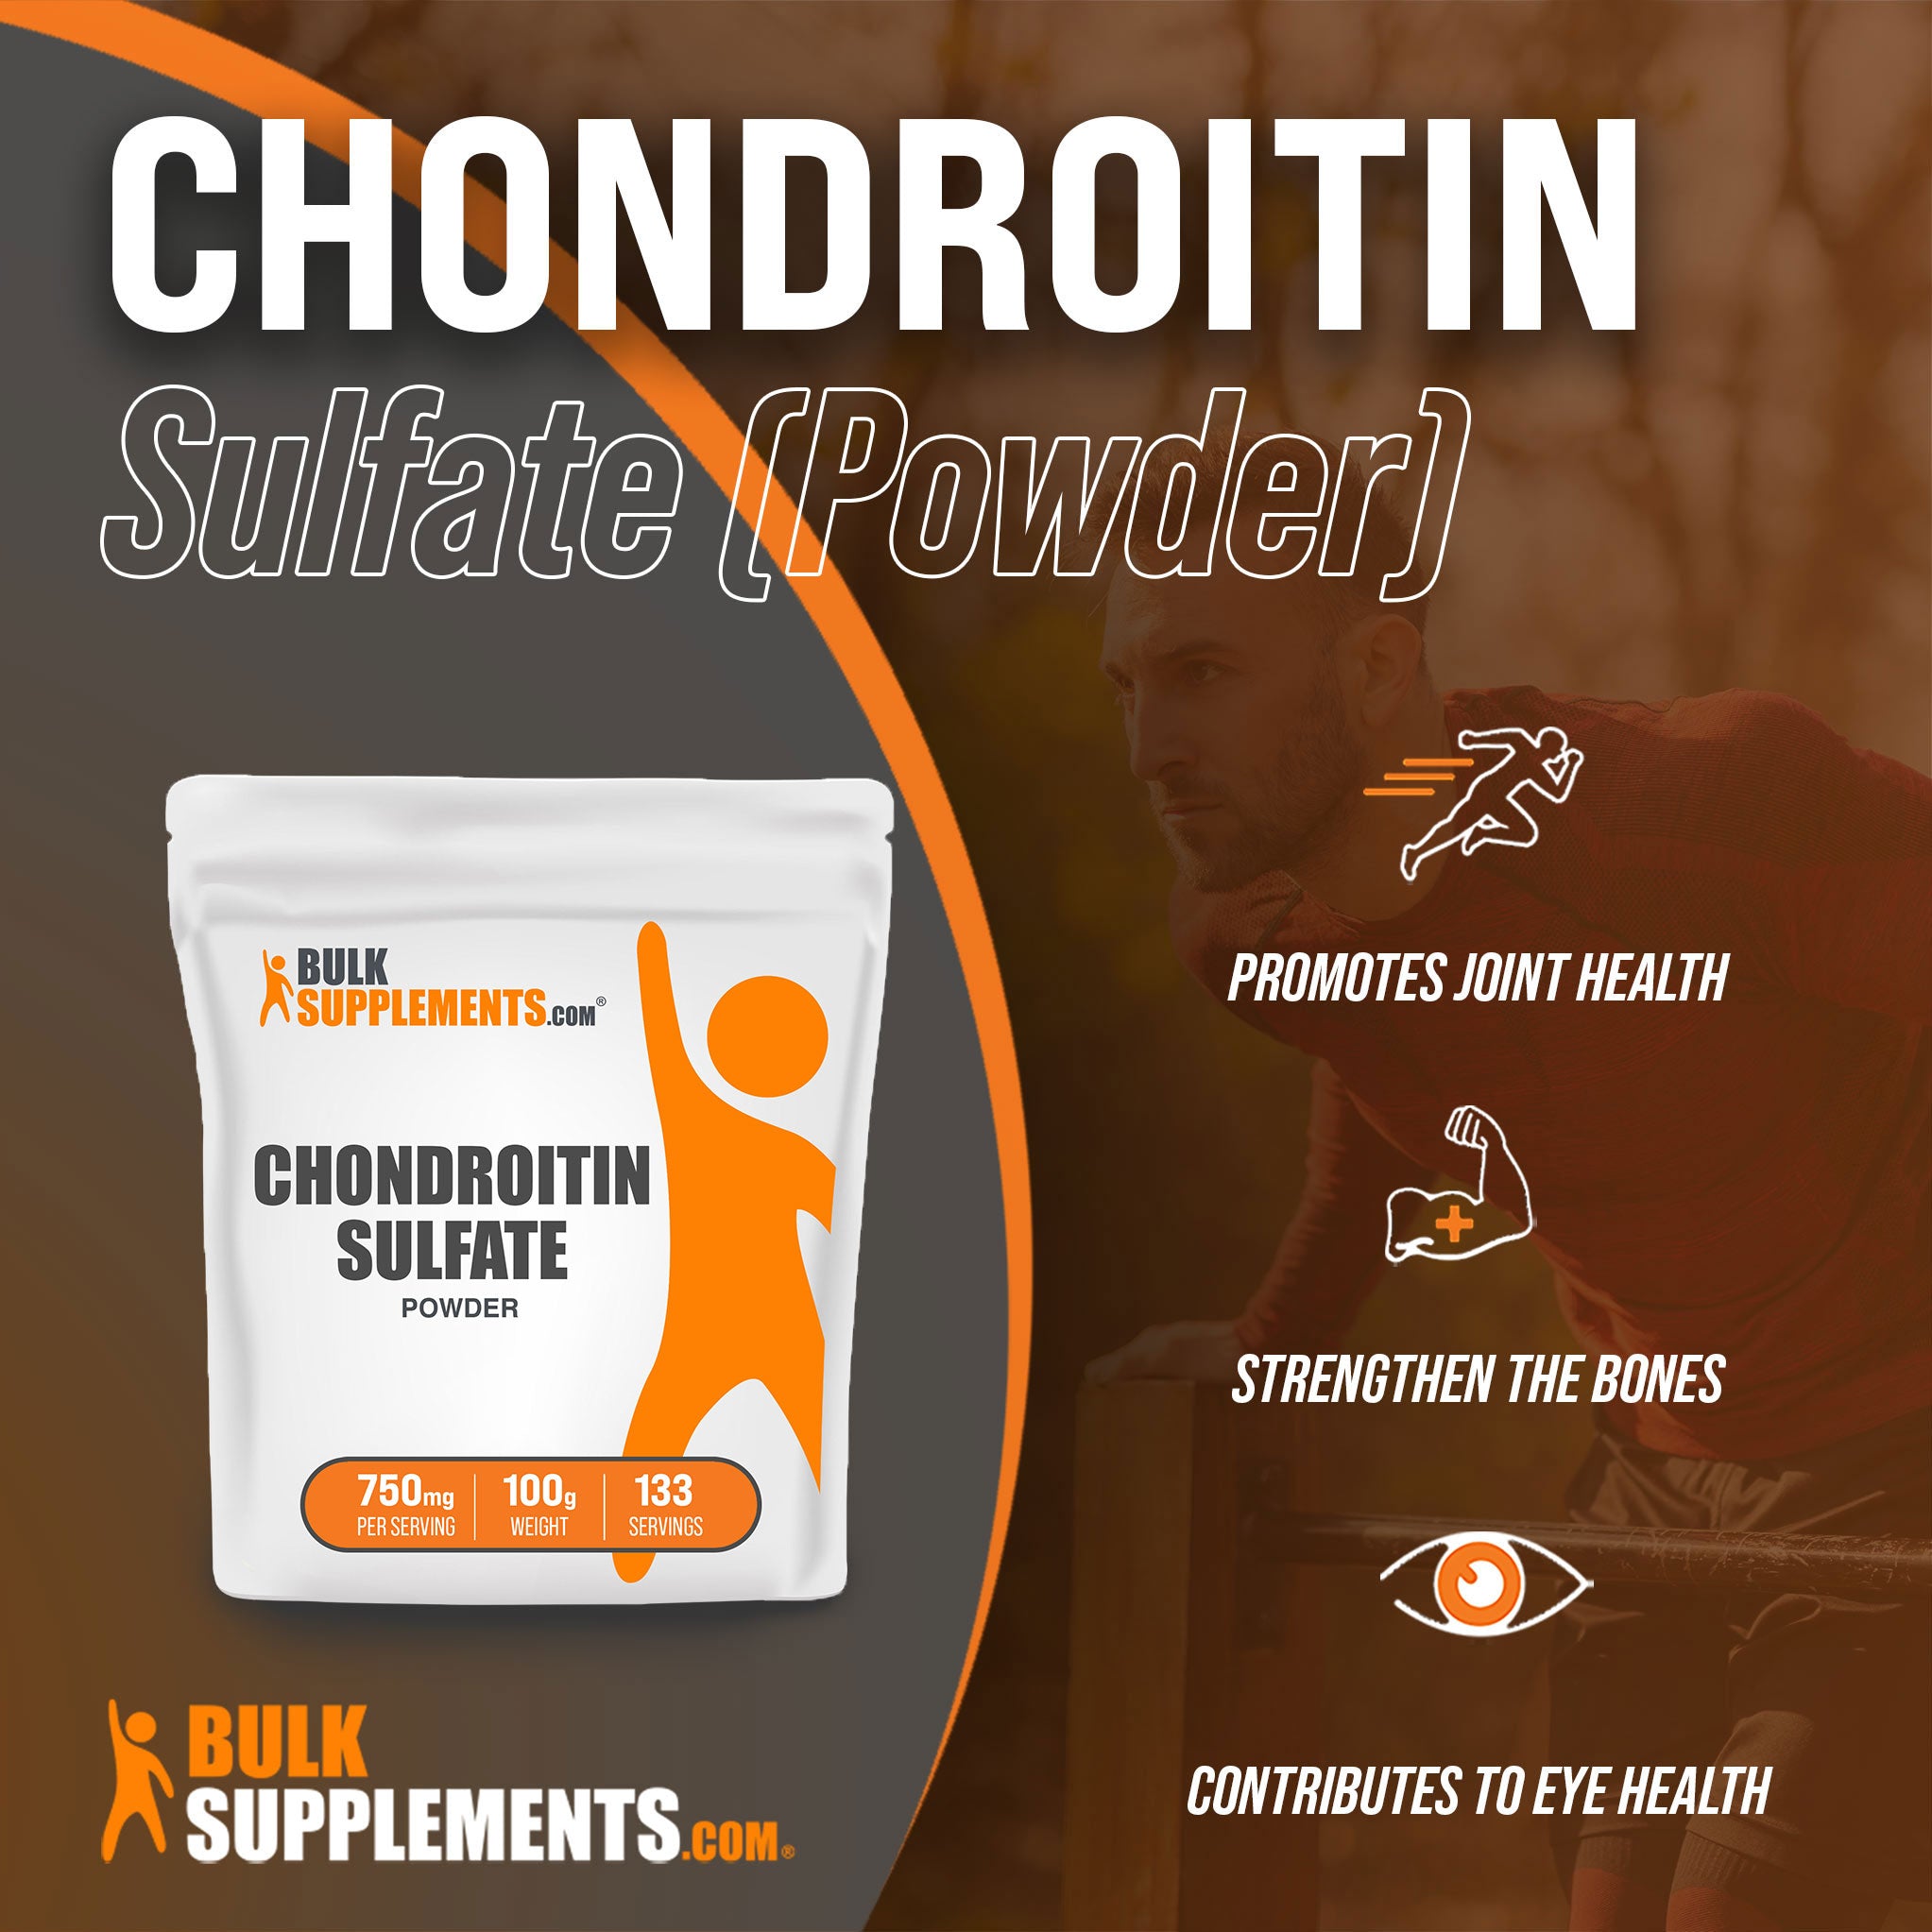 Benefits of 100g Chondroitin Sulfate Powder; joint support supplement, strengthen the bones, contributes to eye health